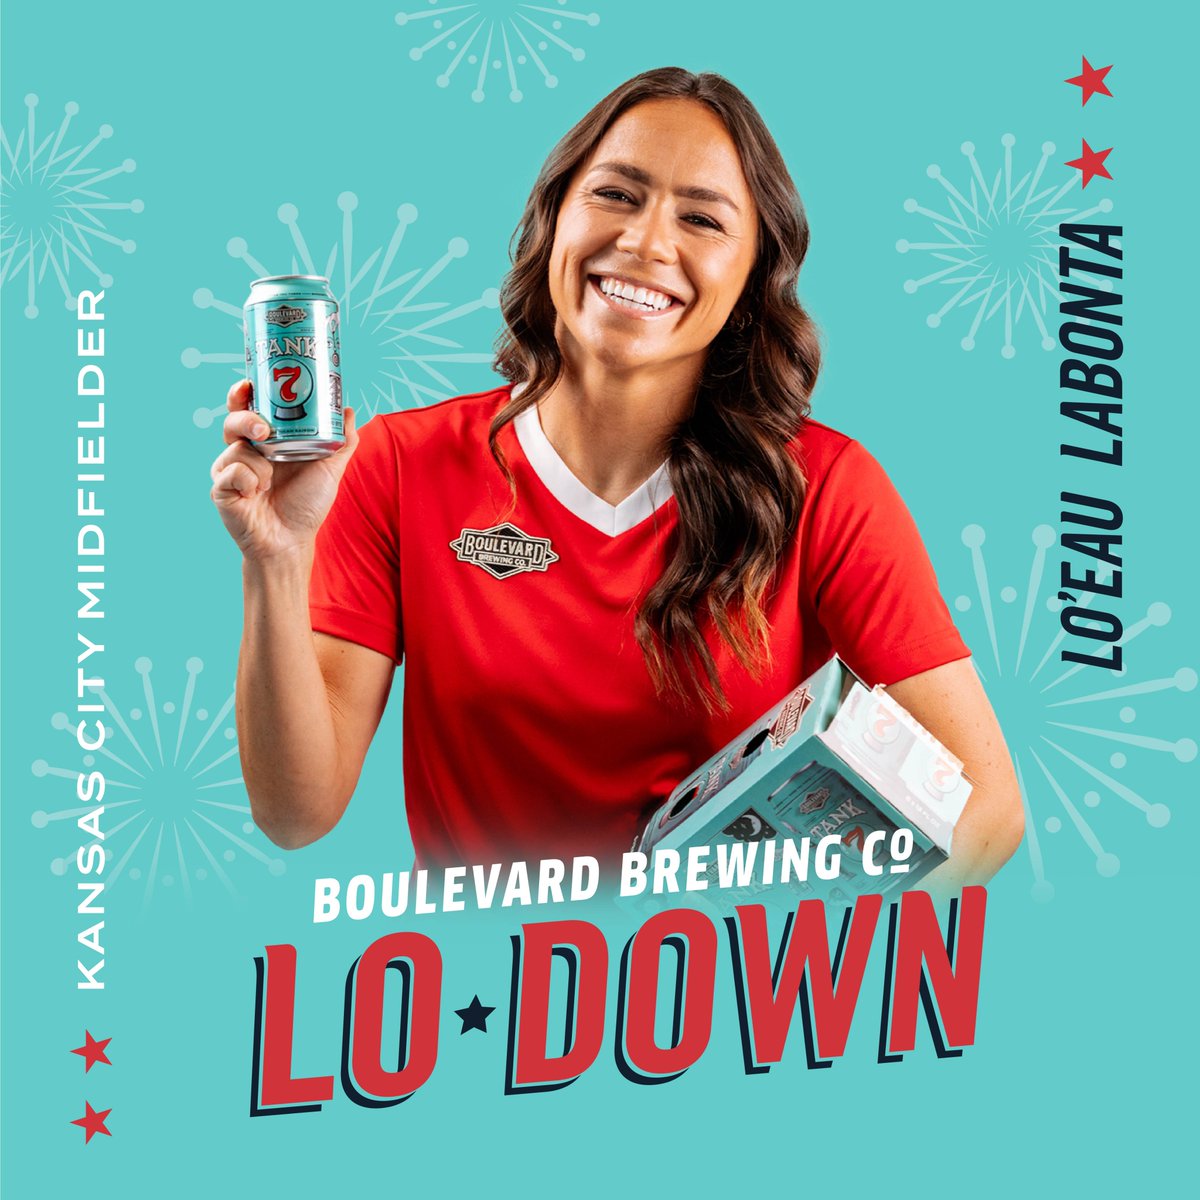 From celebration dances to celebration beers, @L0momma is the queen. We’re yelling out 10 cheers and raising beers to our new honorary Boulevardian! Get the Lo Down on the latest and greatest BLVD beers with reviews by Lo each month over on IG, and stay tuned for more! ⚽️🍺